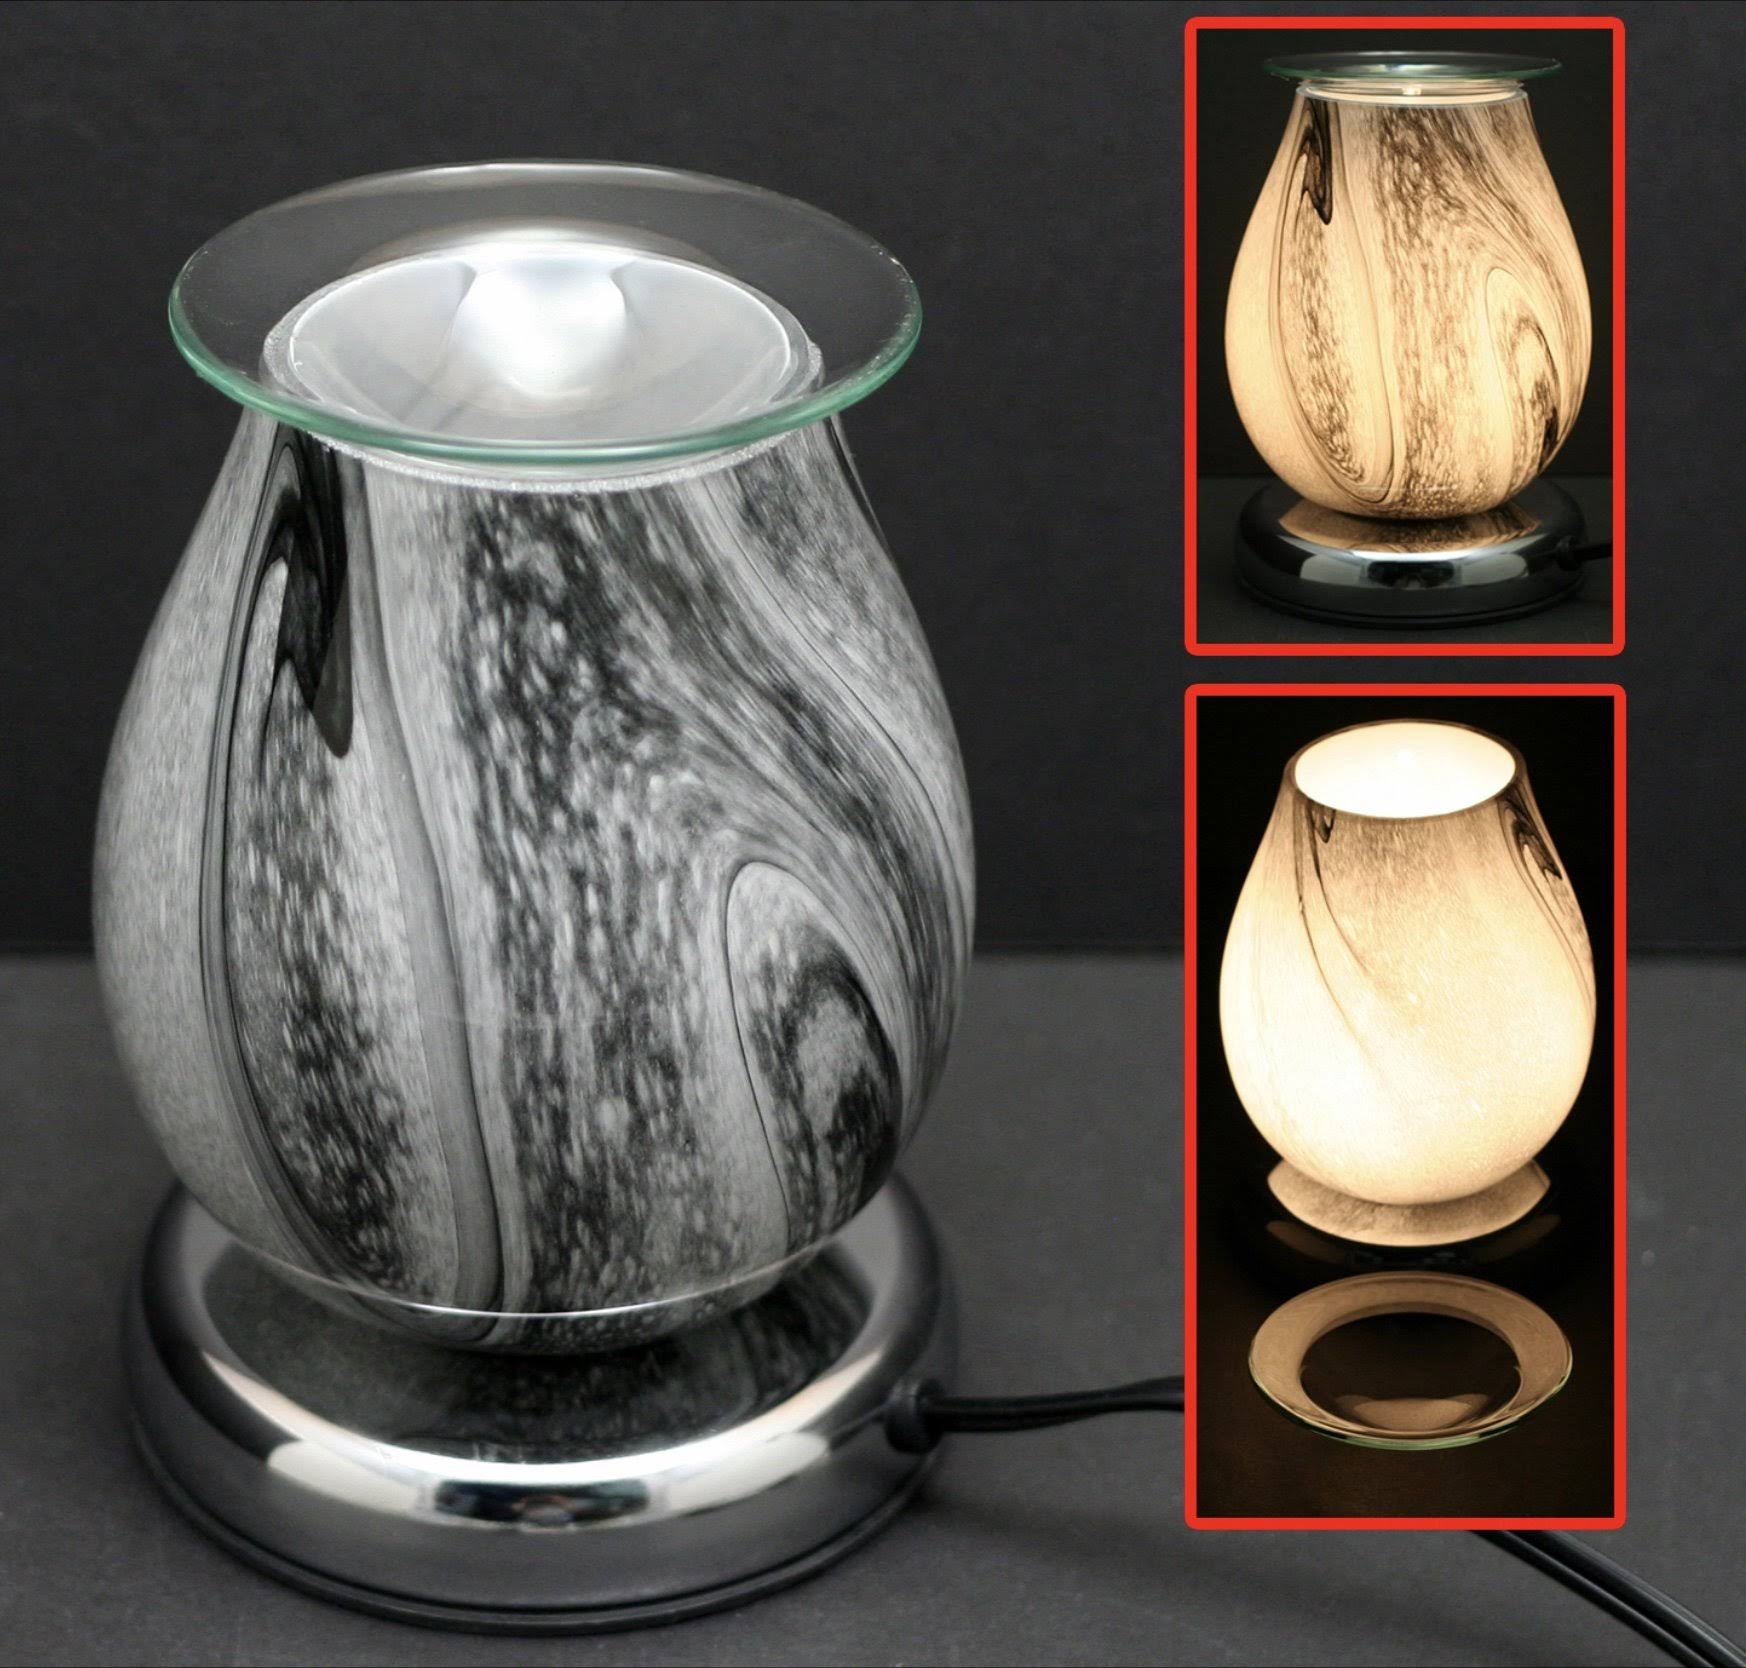 Touch Lamp w/Ess Oil Cup-Egg Shaped Glass, Grey/White Marble